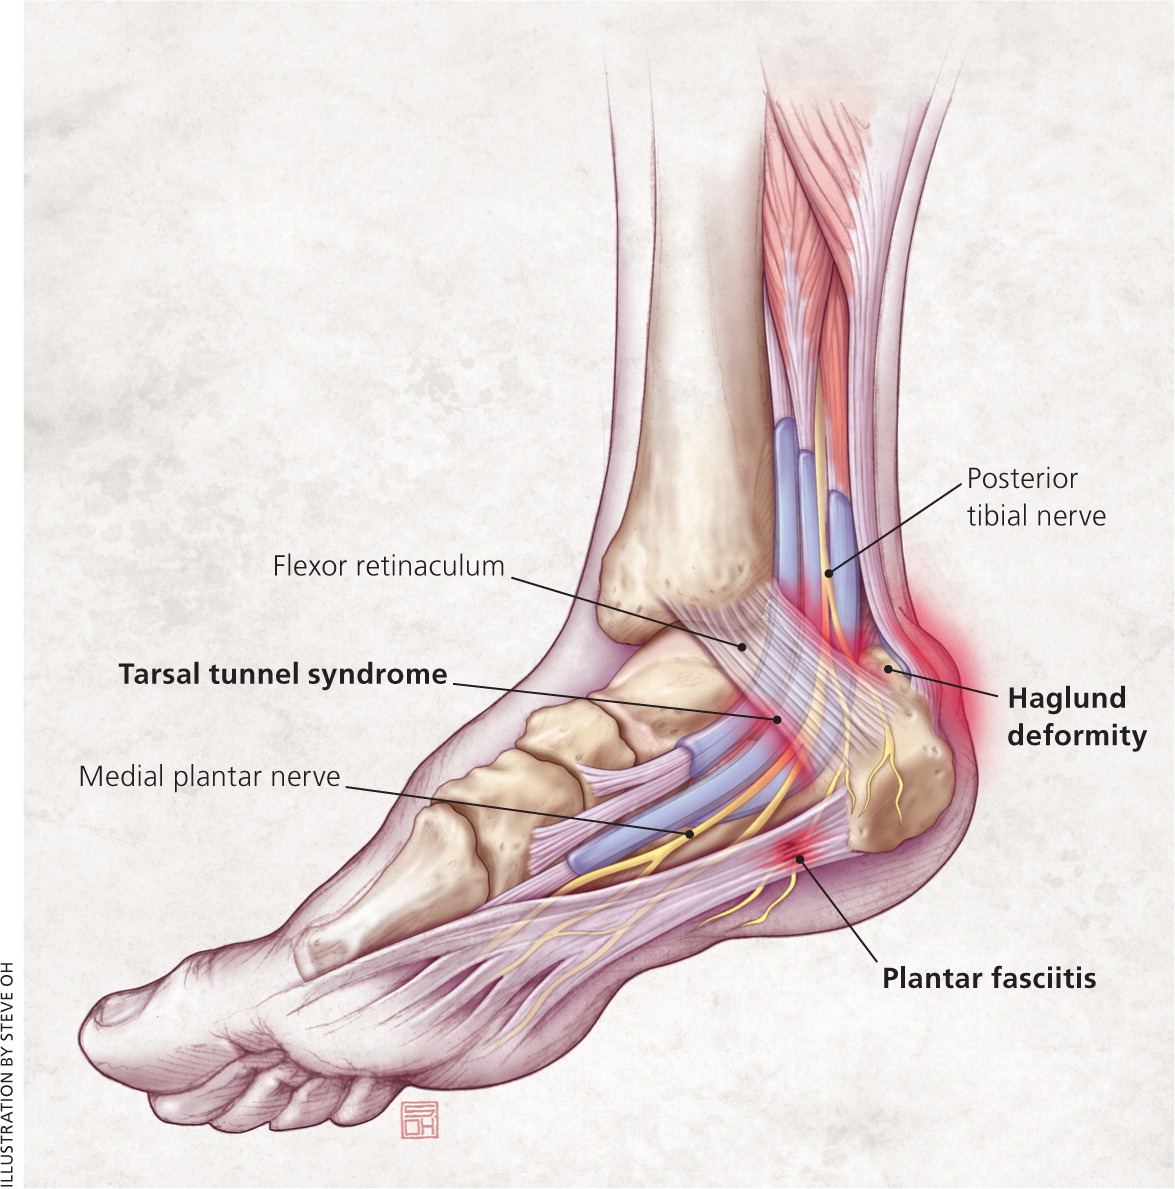 Foot Pain? Could Be Plantar Fasciitis | Island Musculoskeletal Care MD, PC